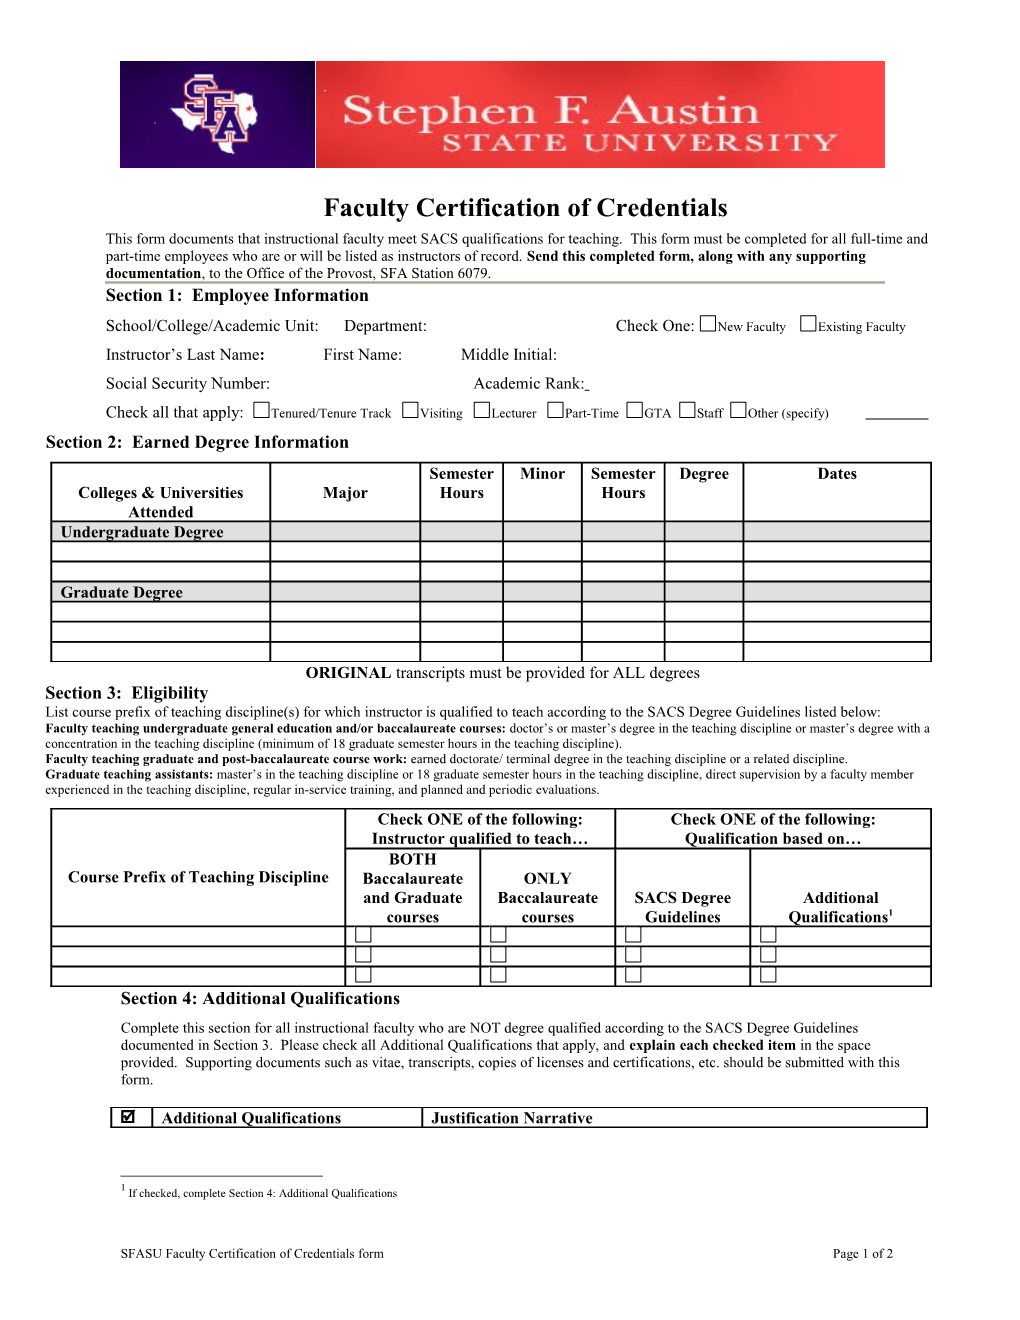 Faculty Certification of Credentials Form